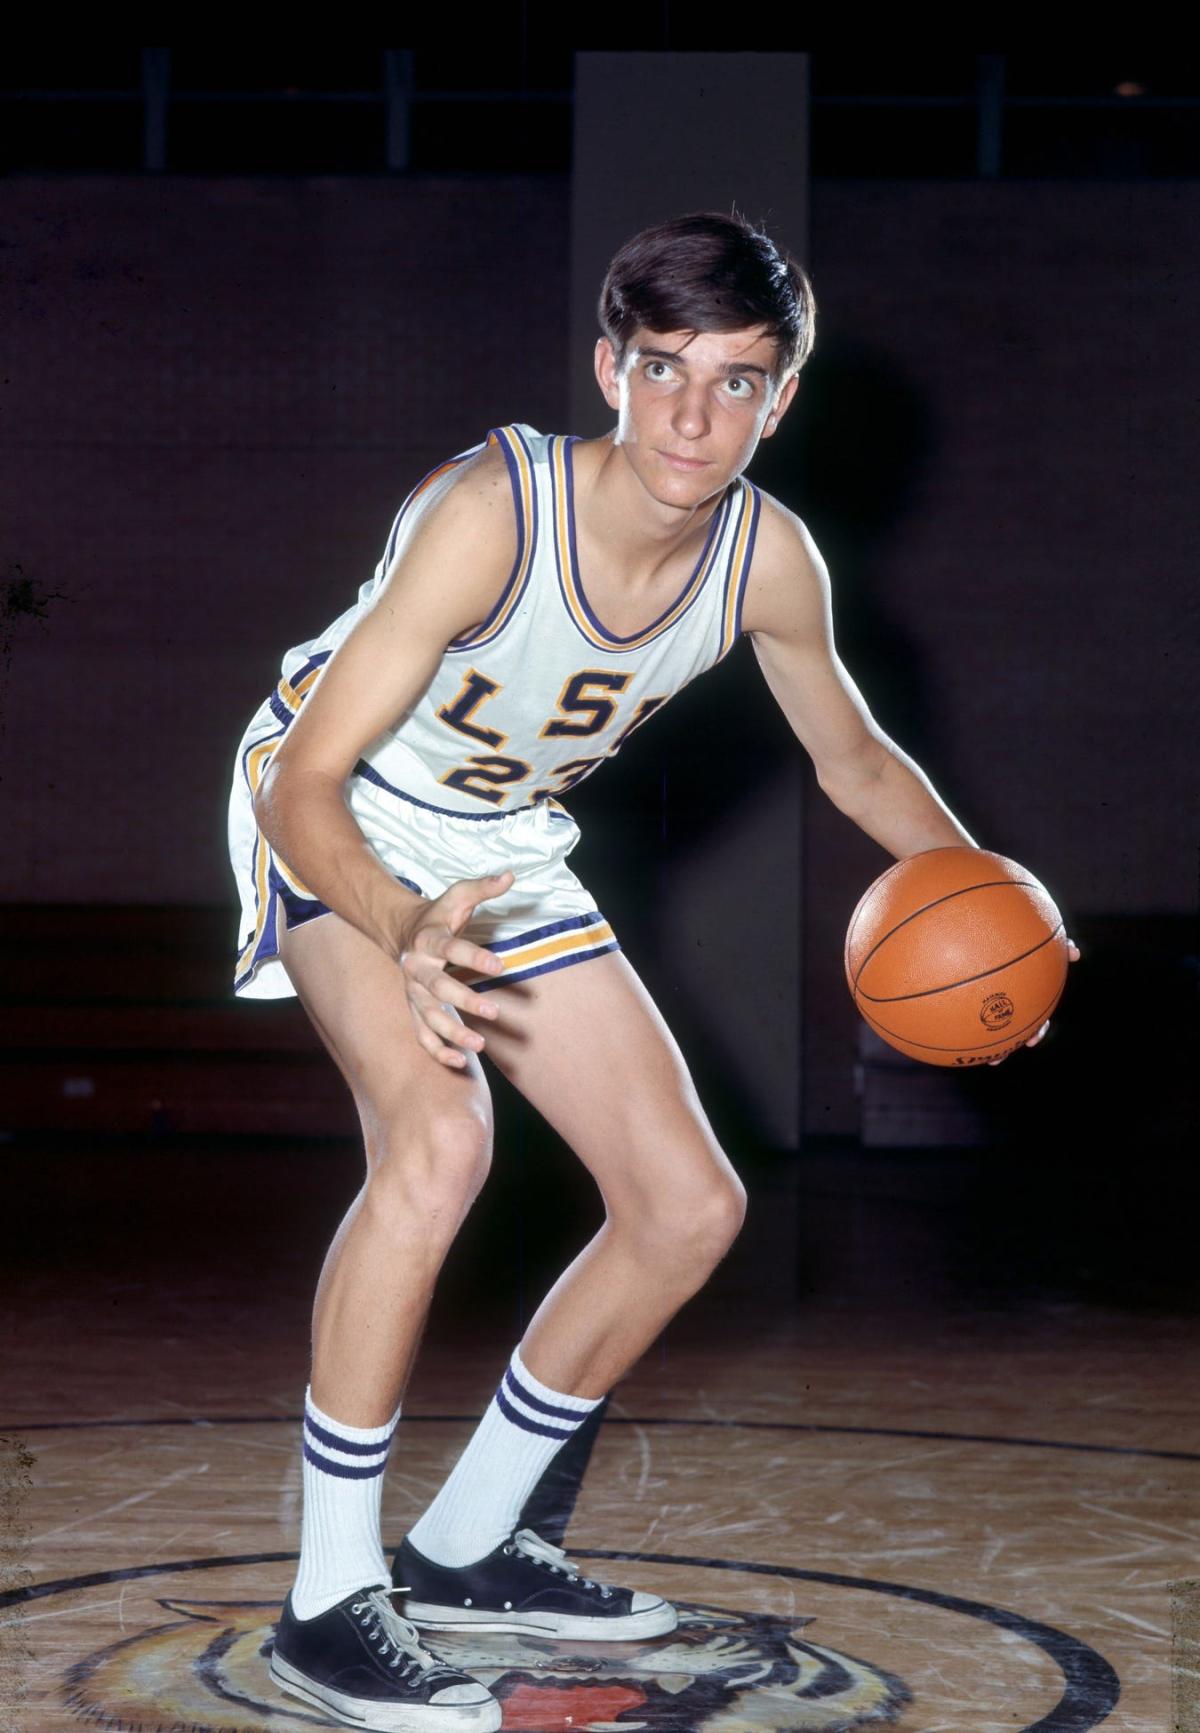 What I learned about Jazz history this offseason: “Pistol” Pete